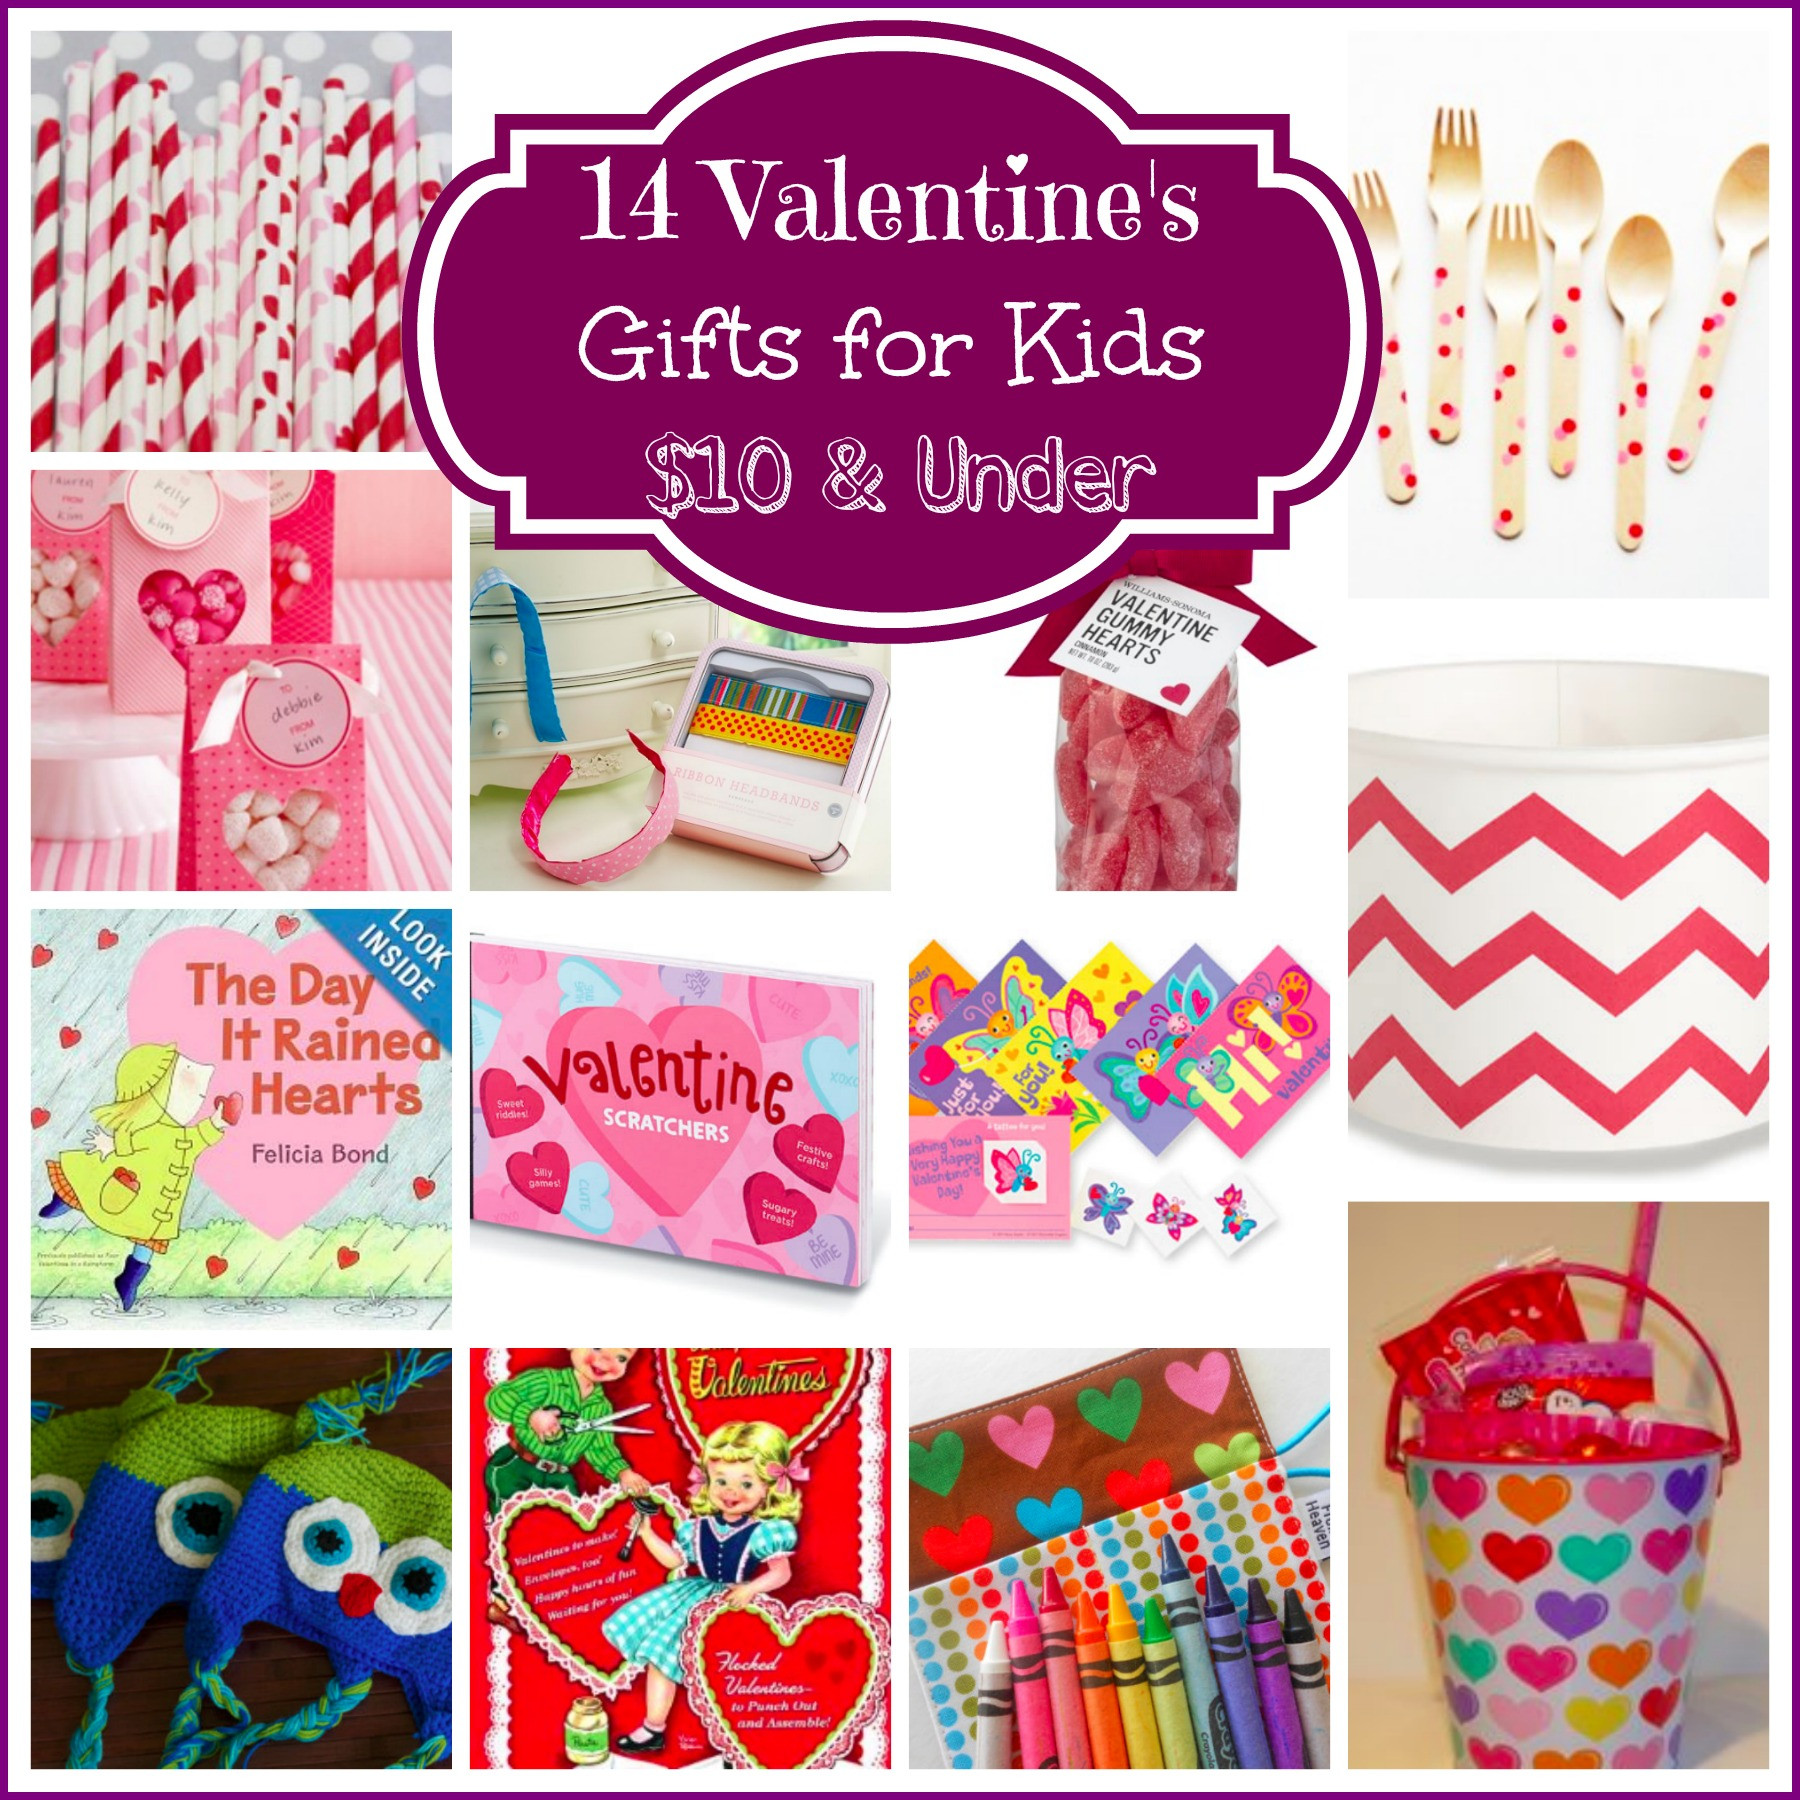 Valentines Gift Ideas For Toddlers
 14 Valentine’s Day Gifts for Kids $10 & Under